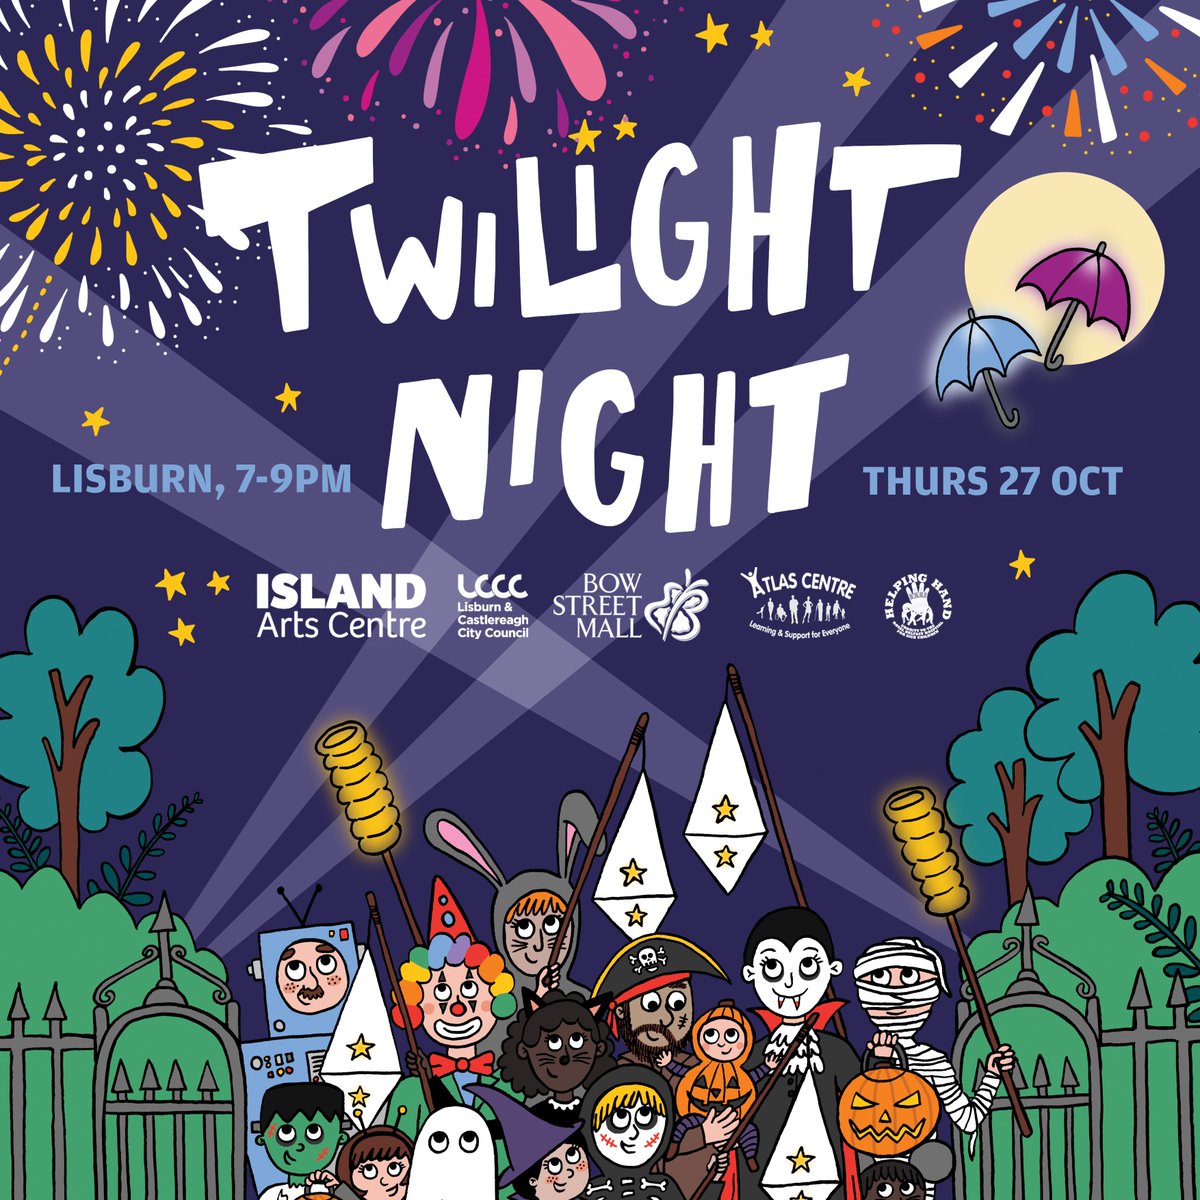 Twilight Night 2022: Thurs 27 Oct Entry to Wallace Park is by pre-purchased ticket only. Tickets are priced at £3 per person with a family ticket of £15.00 (max 6 per household). They can be purchased from Tuesday 11 Oct 12.30pm at islandartscentre.com